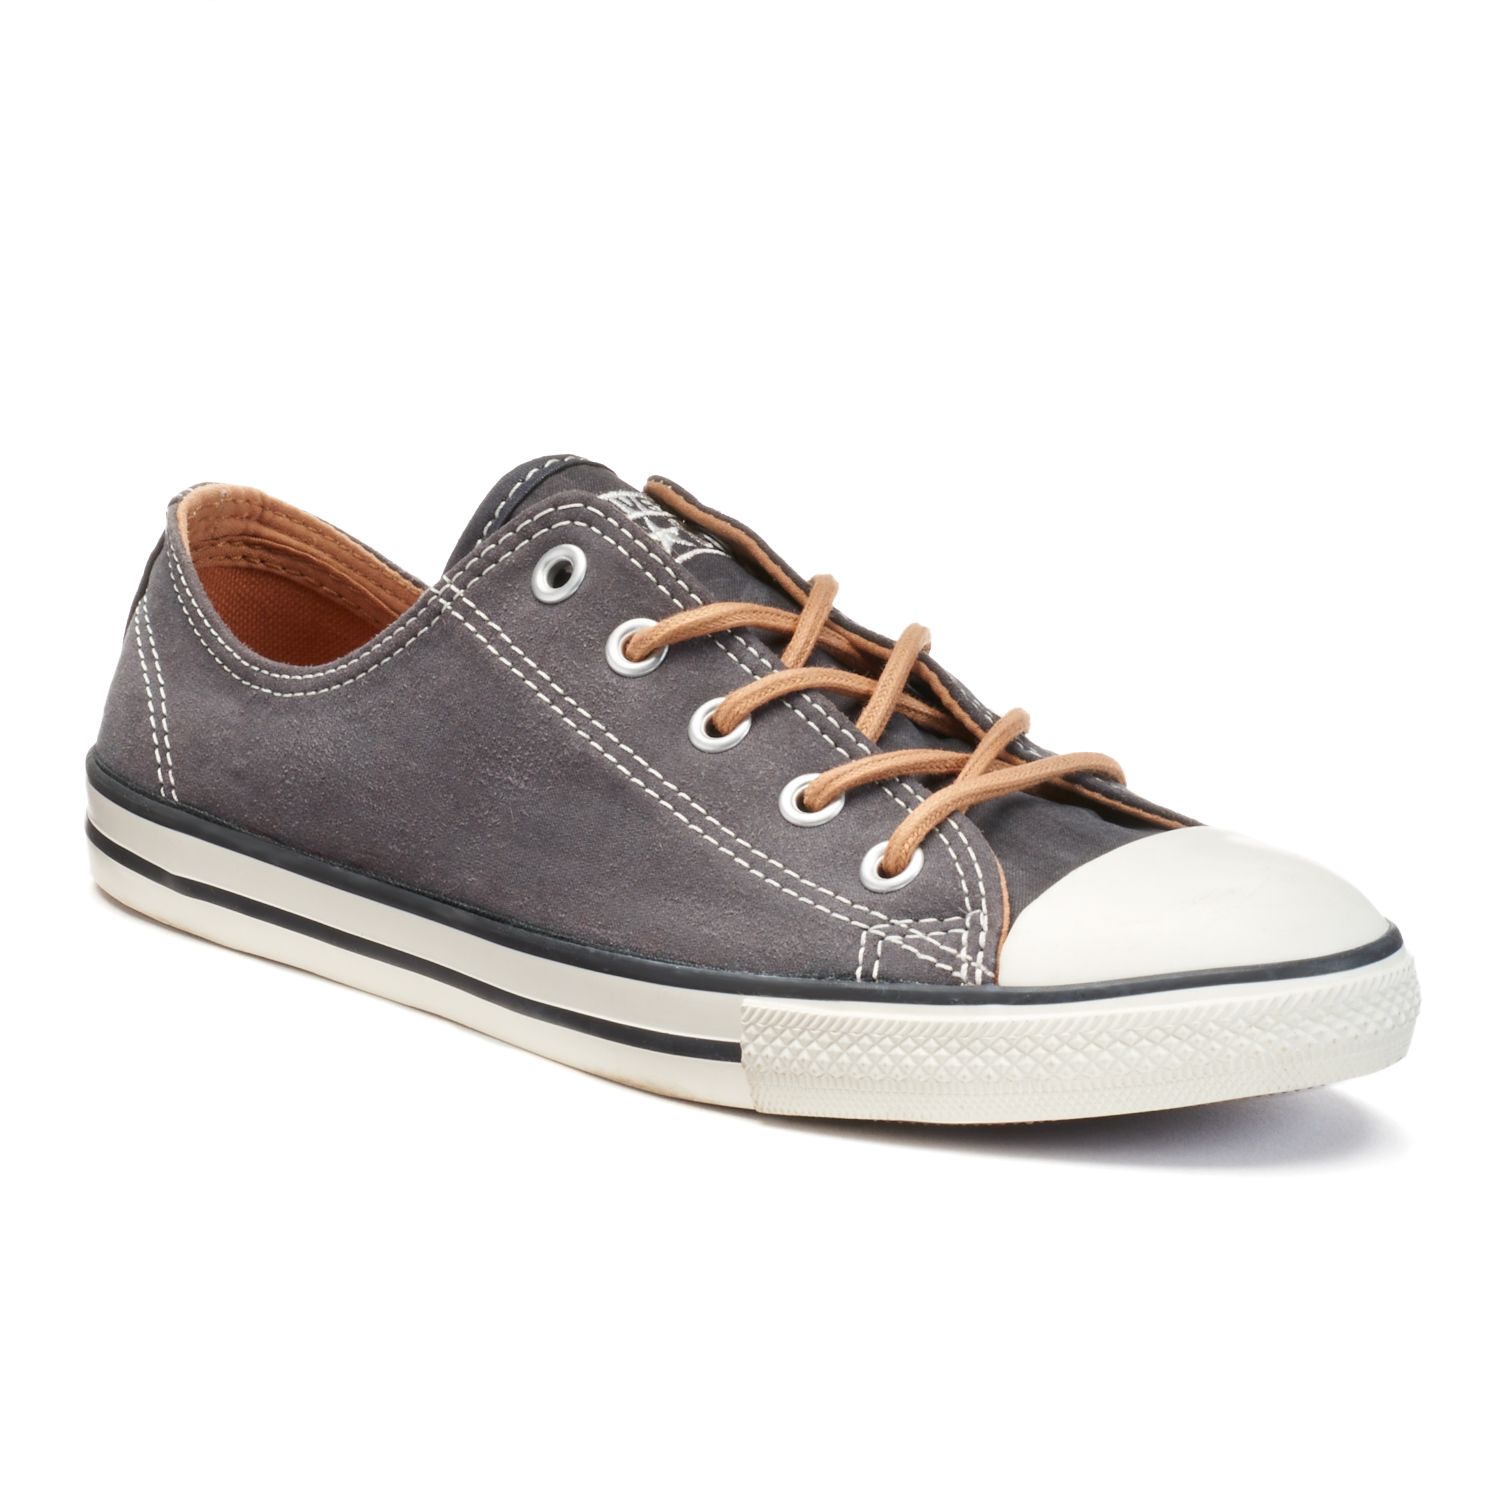 converse dainty peached canvas